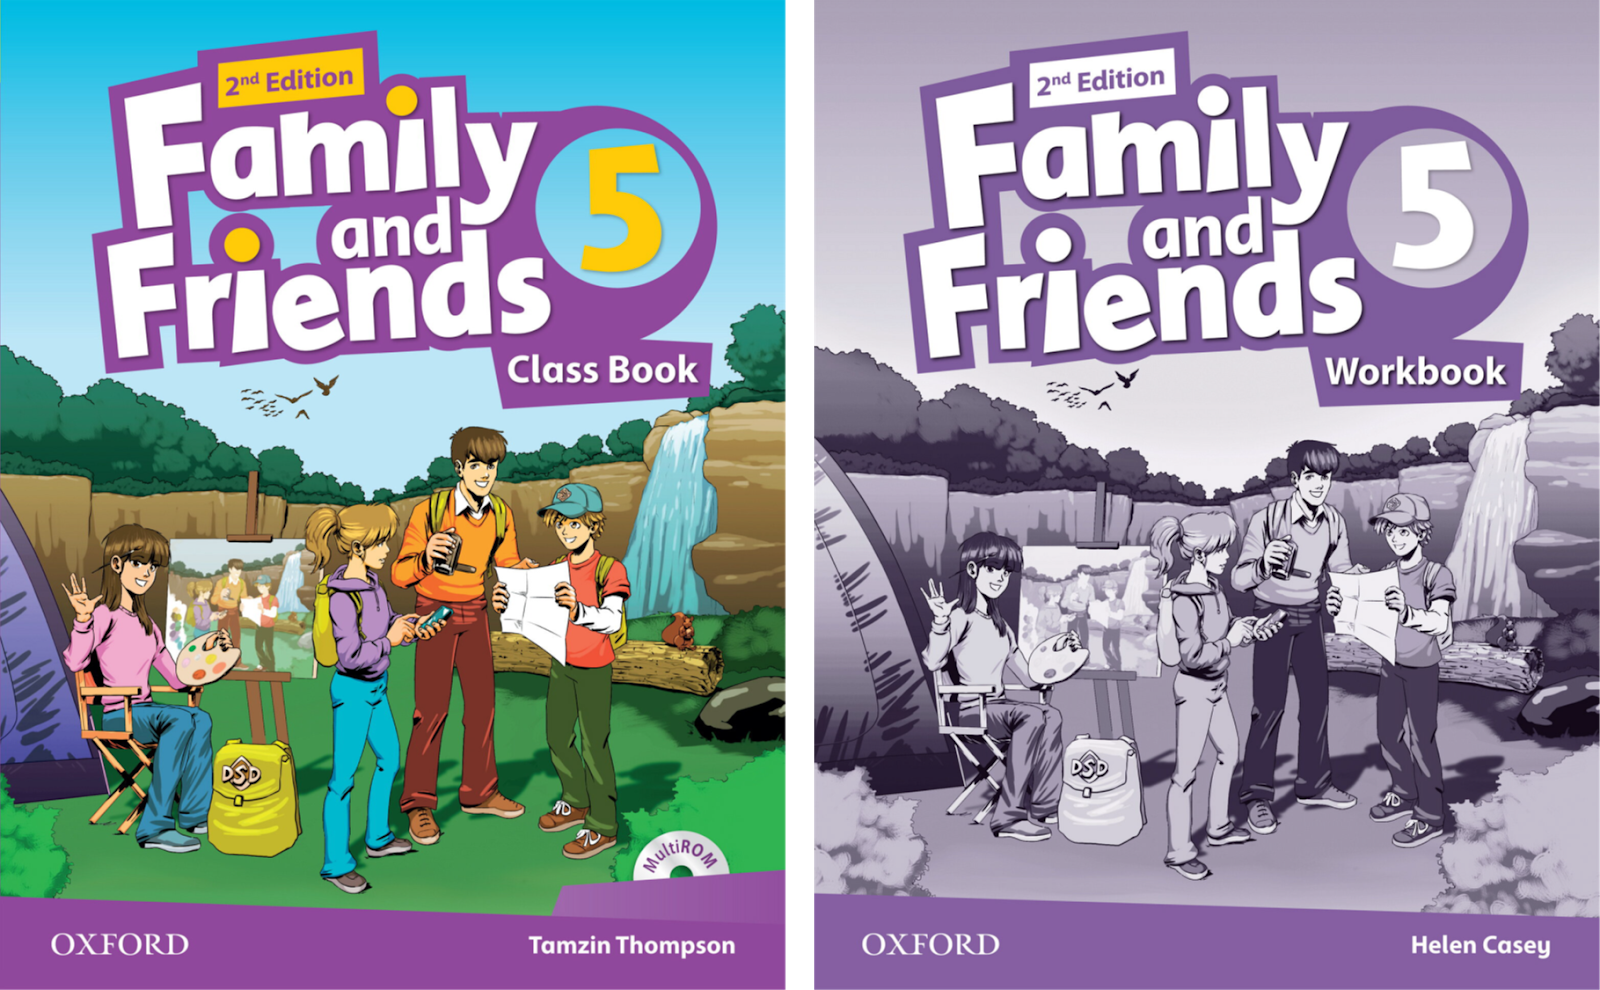 Family and friends 2 (2nd Edition) комплект. \Фэмили энд френдс 2 издание. Учебник Oxford Family and friends 2. Oxford Family and friends 5 класс. Family and friends projects